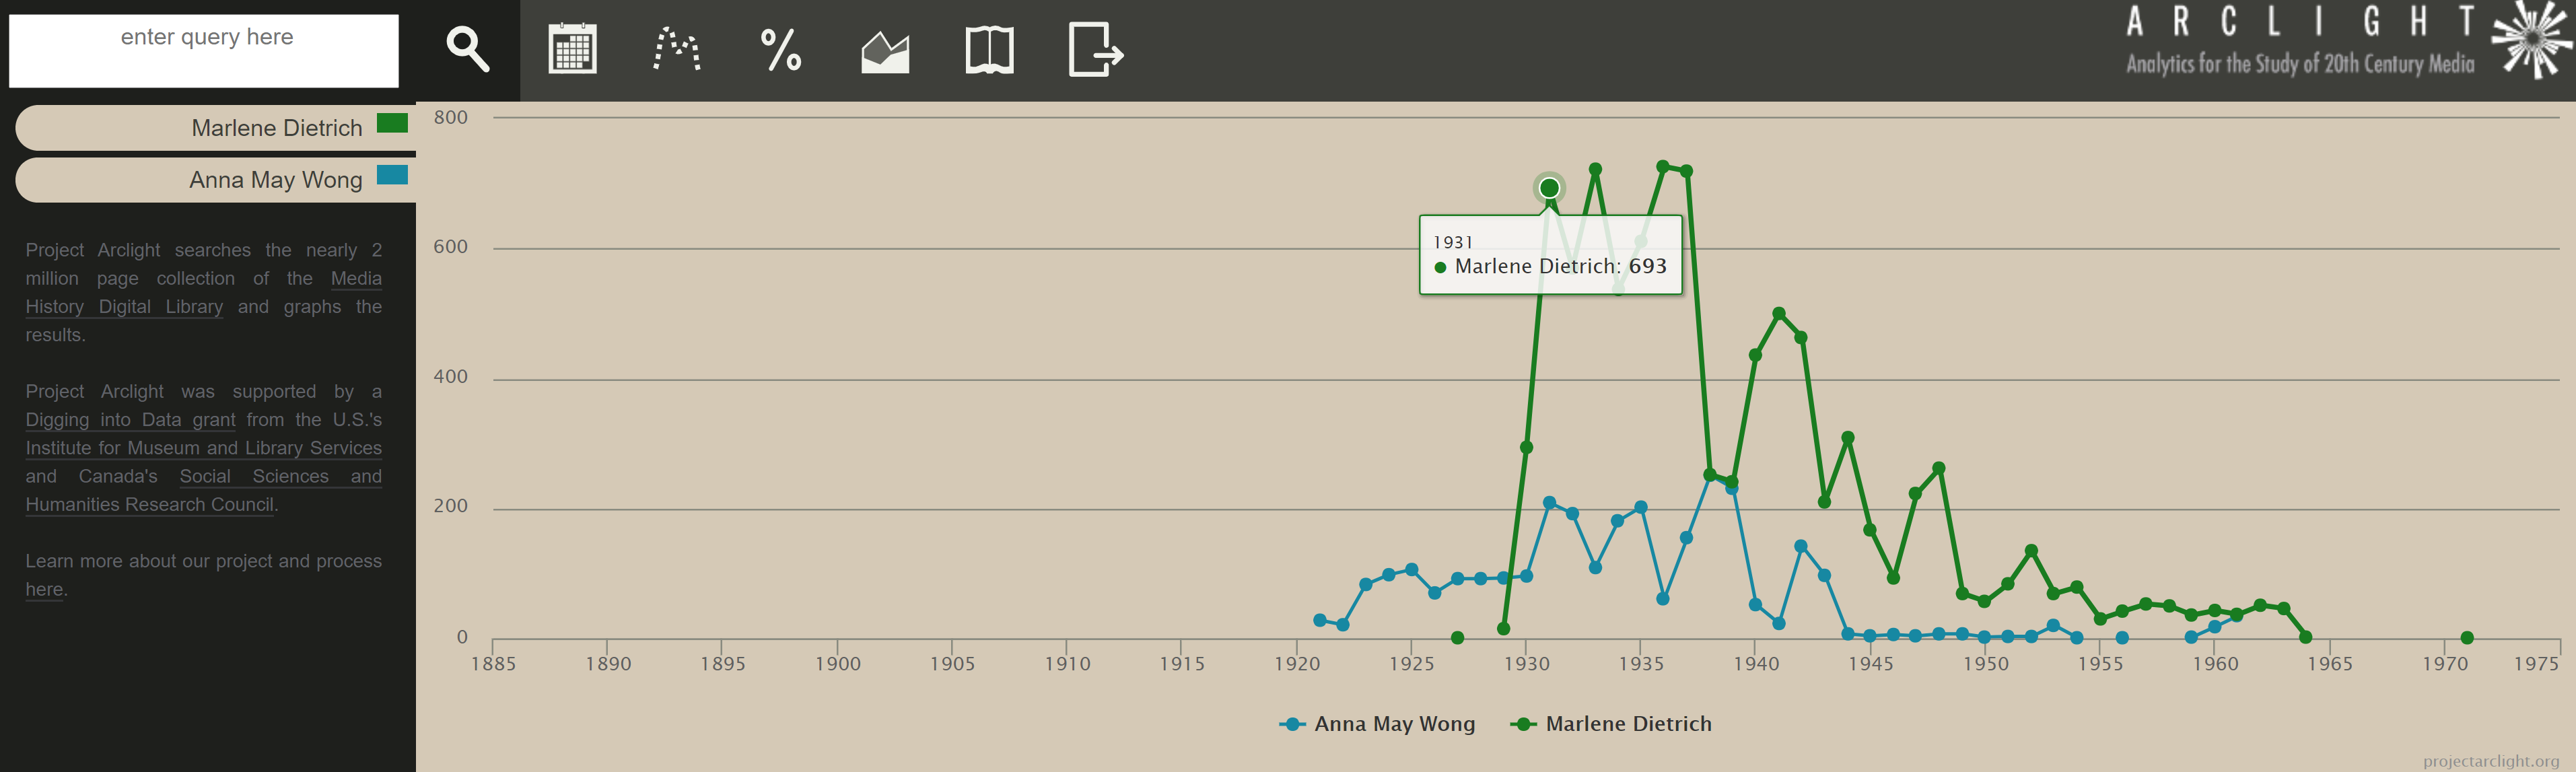 screenshot of Arclight search comparing Anna May Wong and Marlene Dietrich